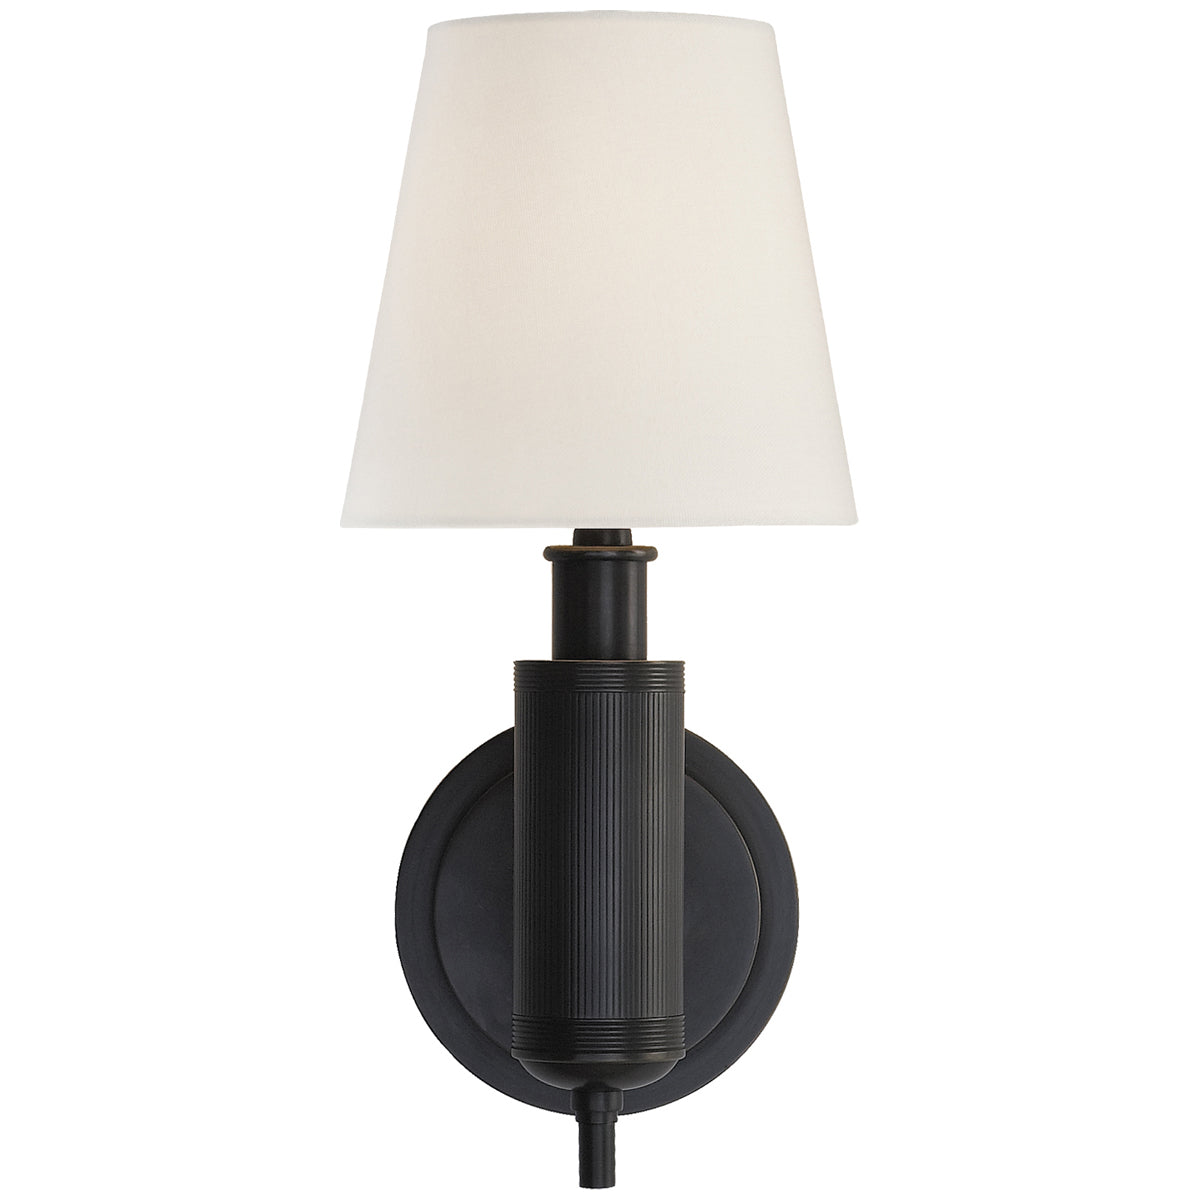 Visual Comfort Longacre Sconce with Linen Shade